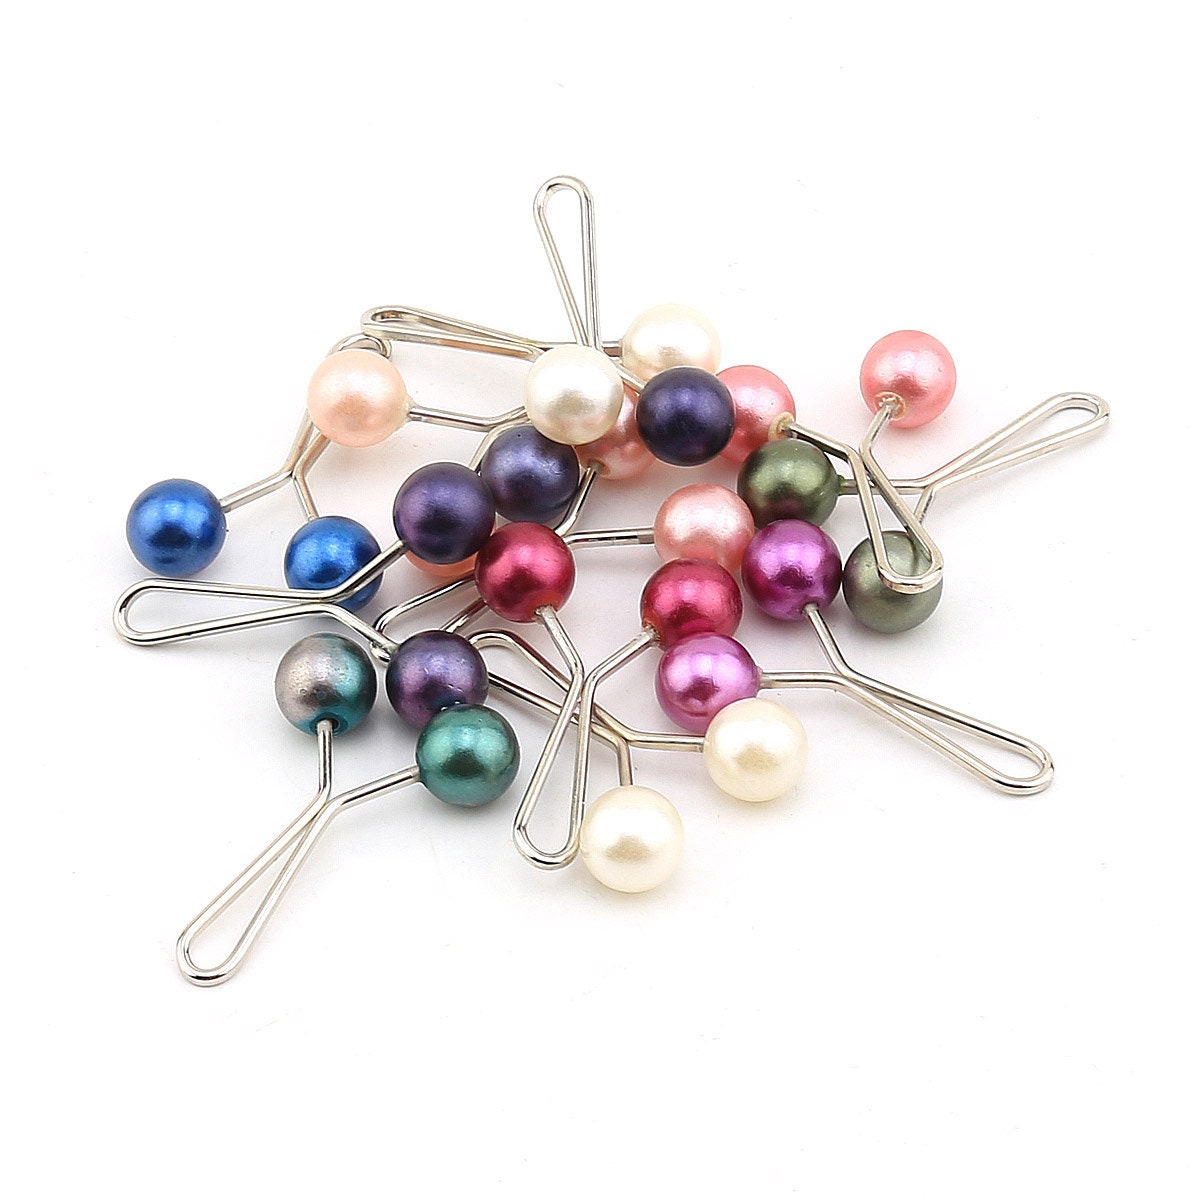 Large Coil 40mm Safety Pins for Laundry ID Clothes Marking & Tagging 